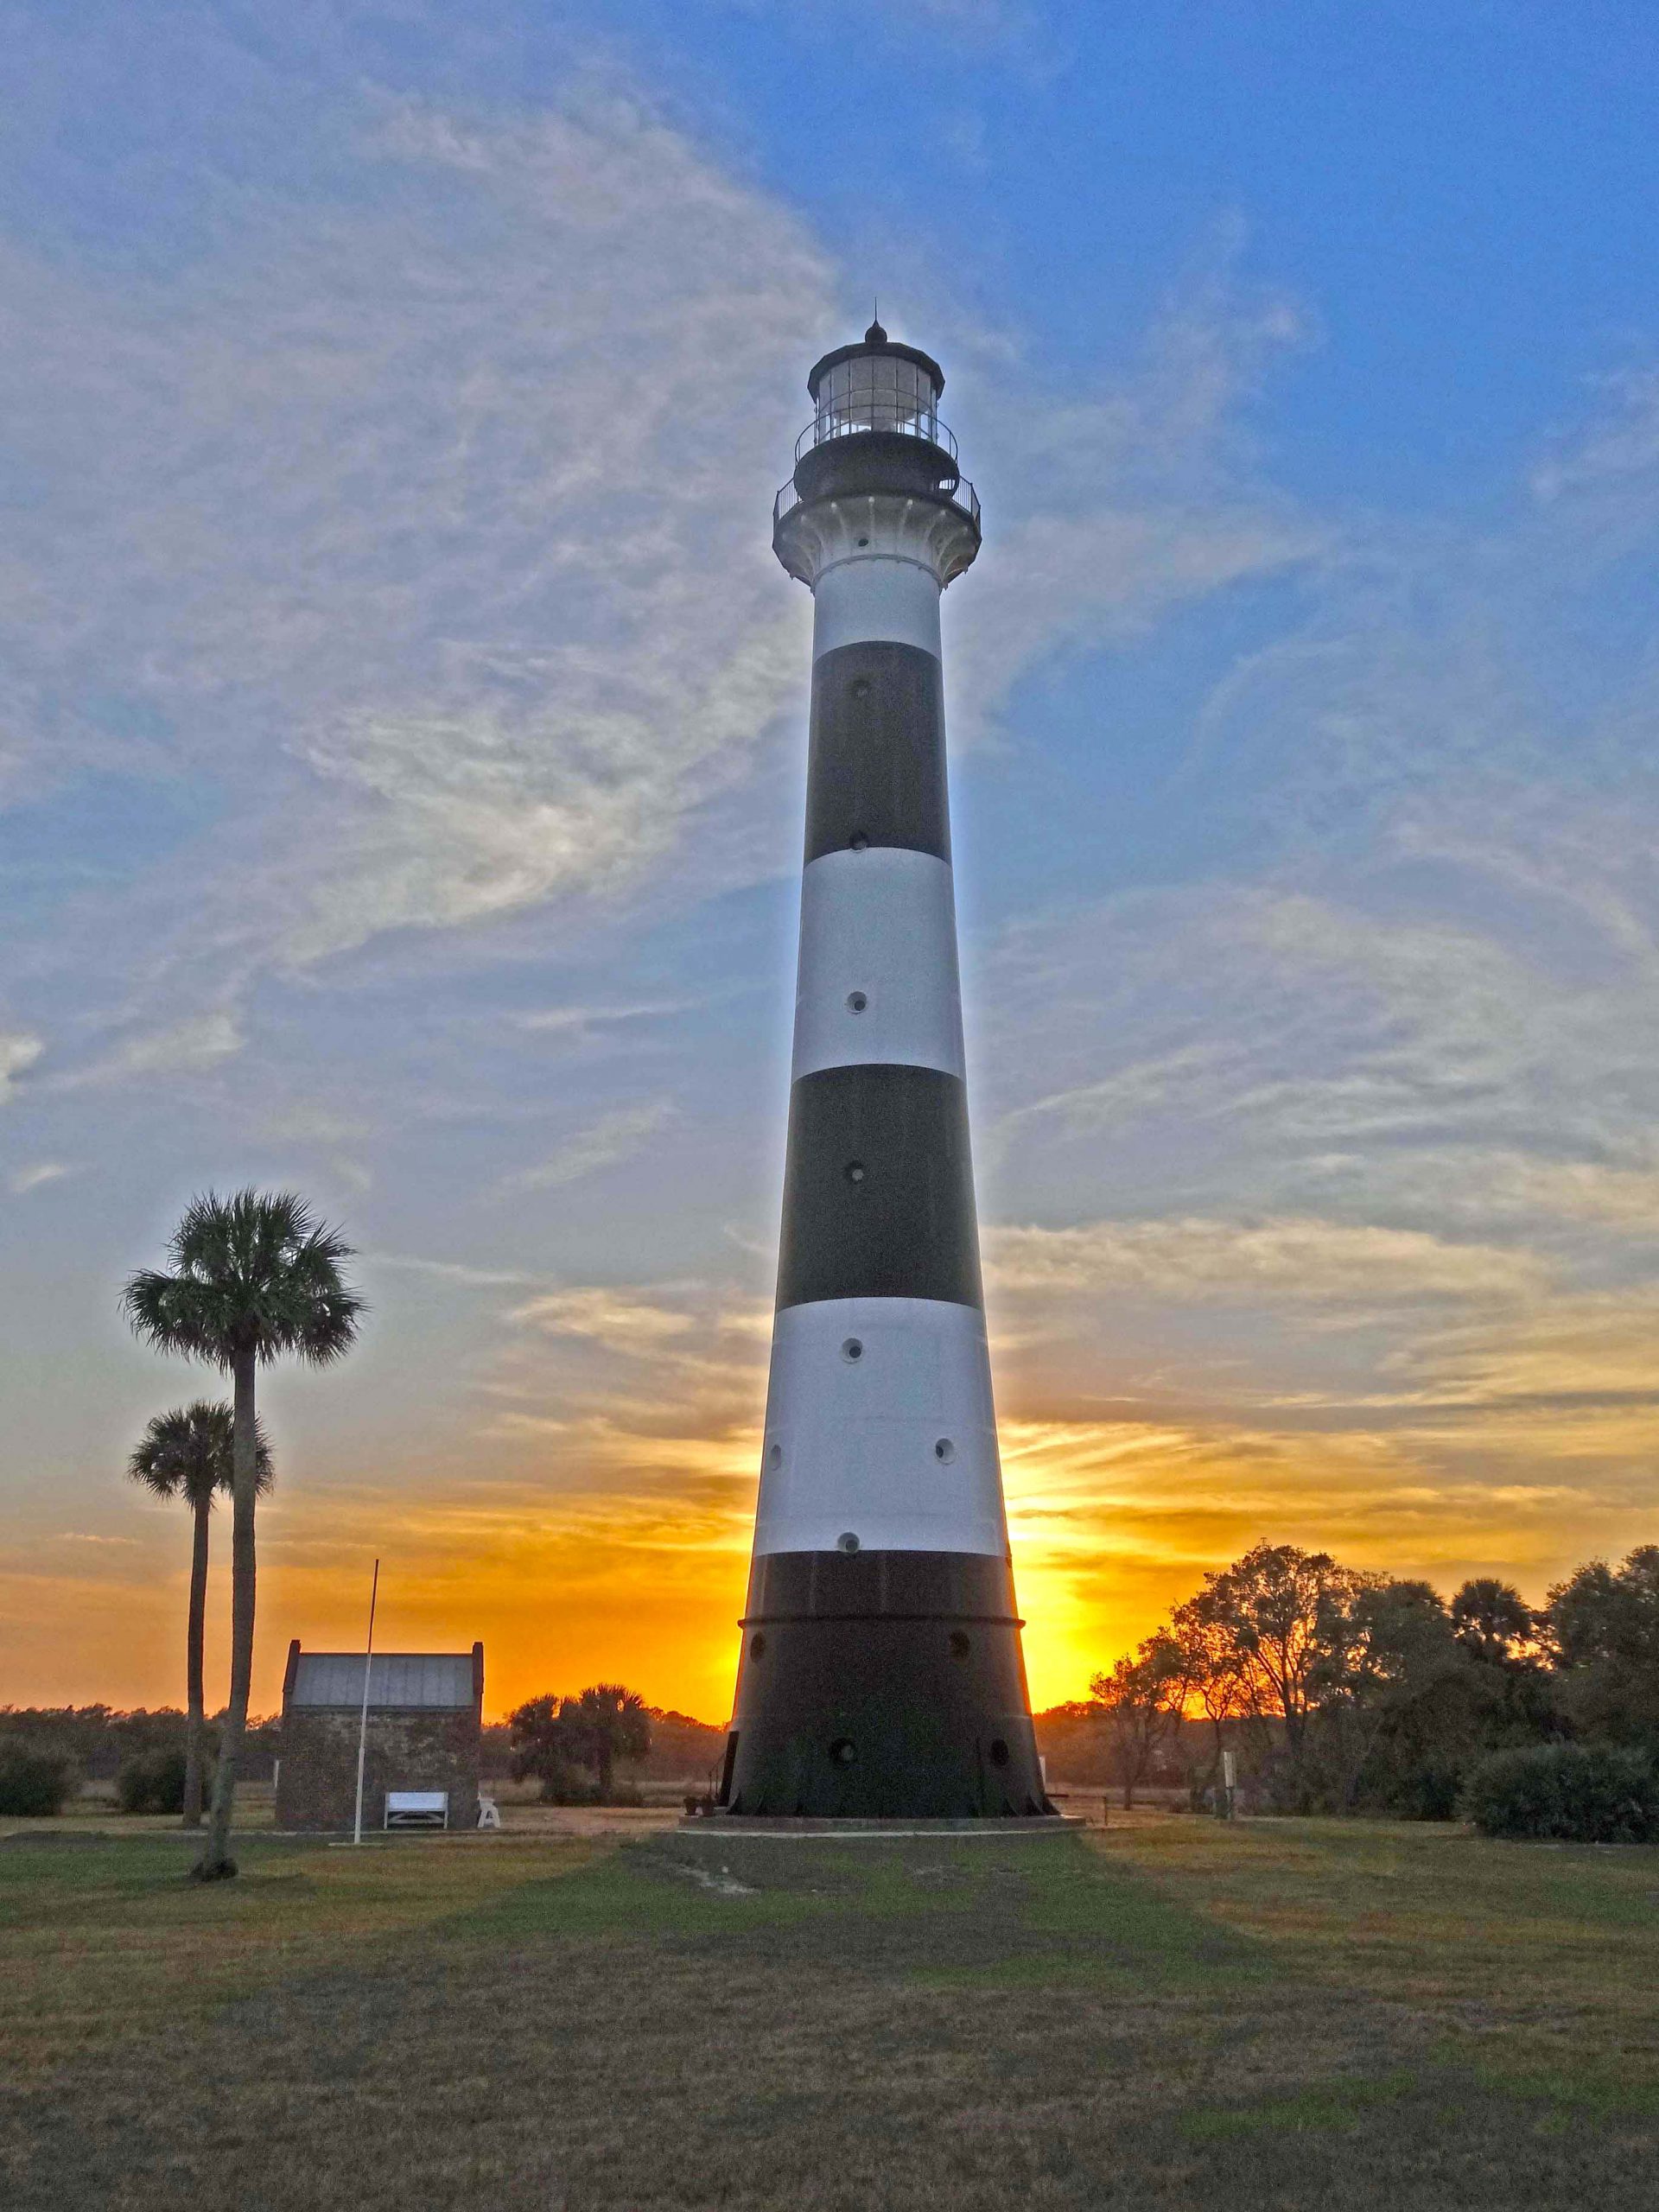 Sunset and Moonrise over the Cape Canaveral Lighthouse